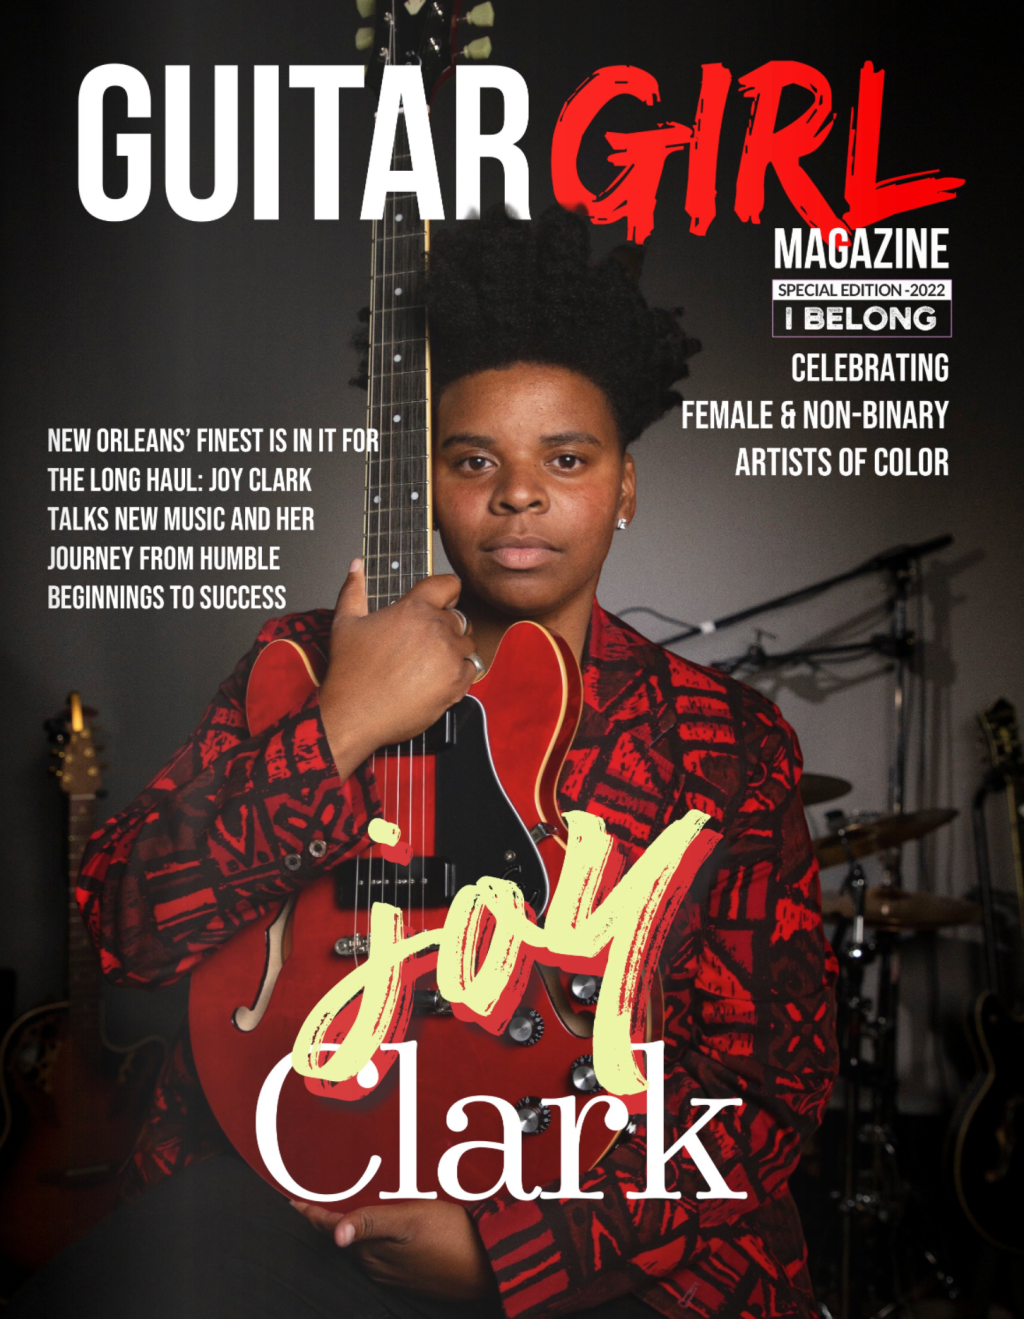 FEATURE: Guitar Girl Magazine’s latest issue “I Belong: Celebrating Female & Non-Binary Artists of Color”